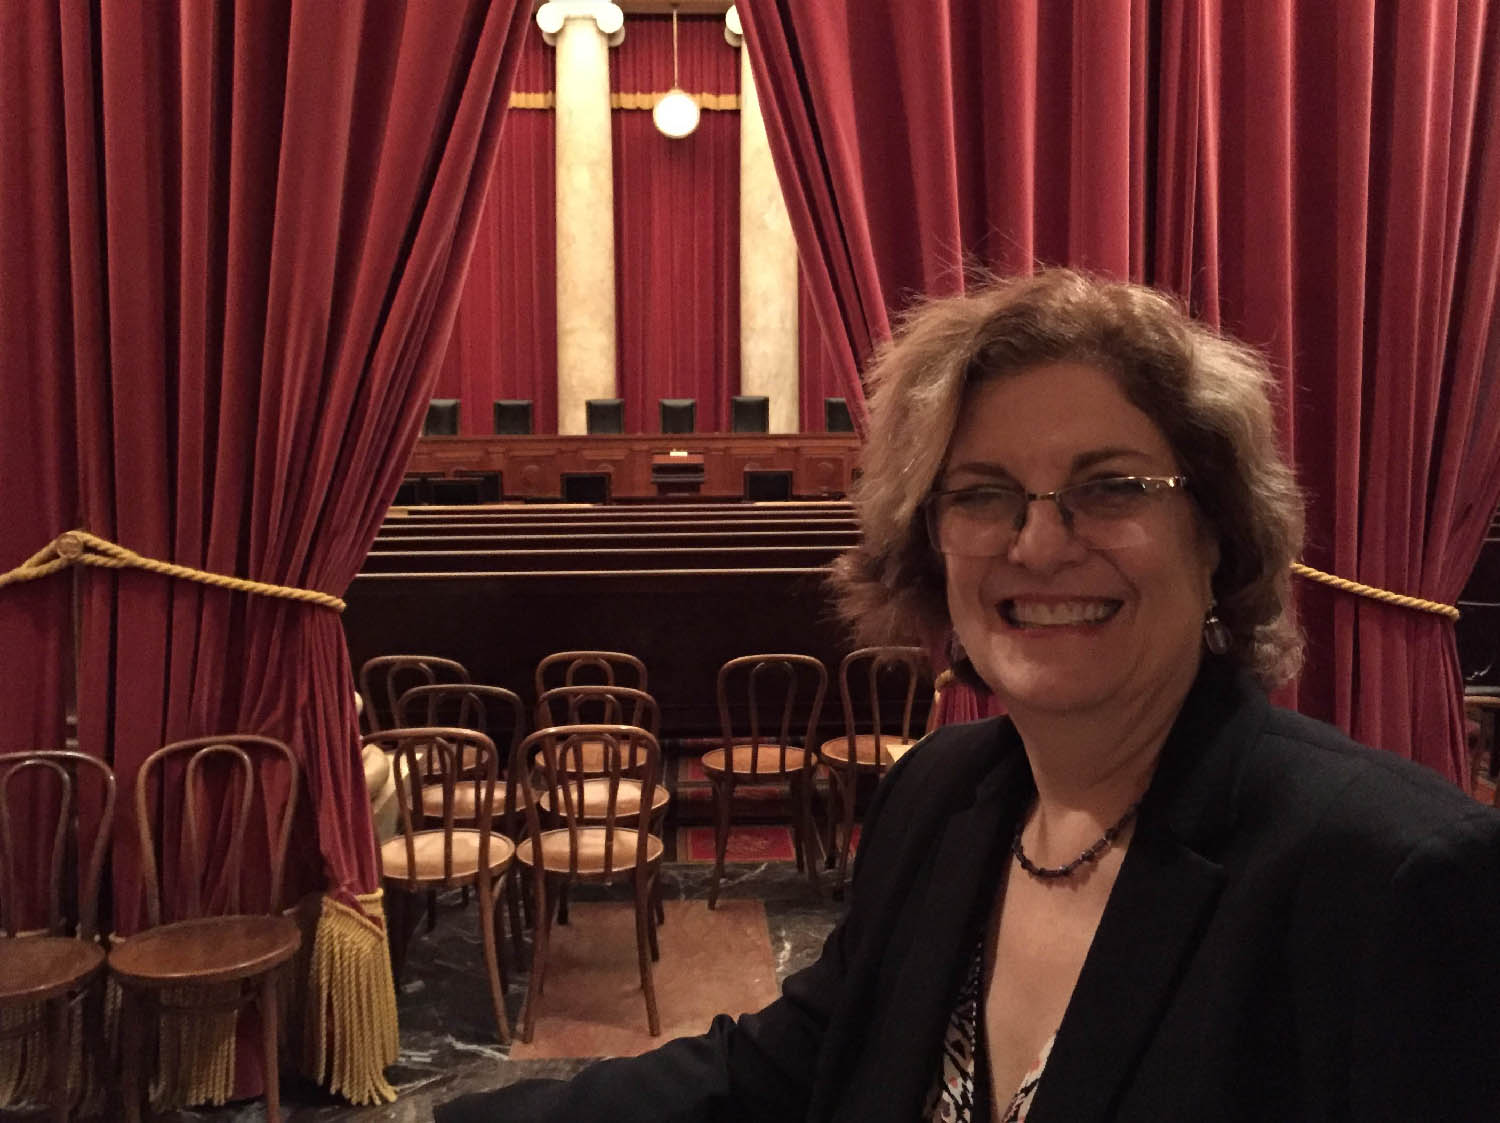 LBJ Senior Lecturer Michele Deitch in the courtroom at the U.S. Supreme Court on the day of her admittance to the Supreme Court Bar Association